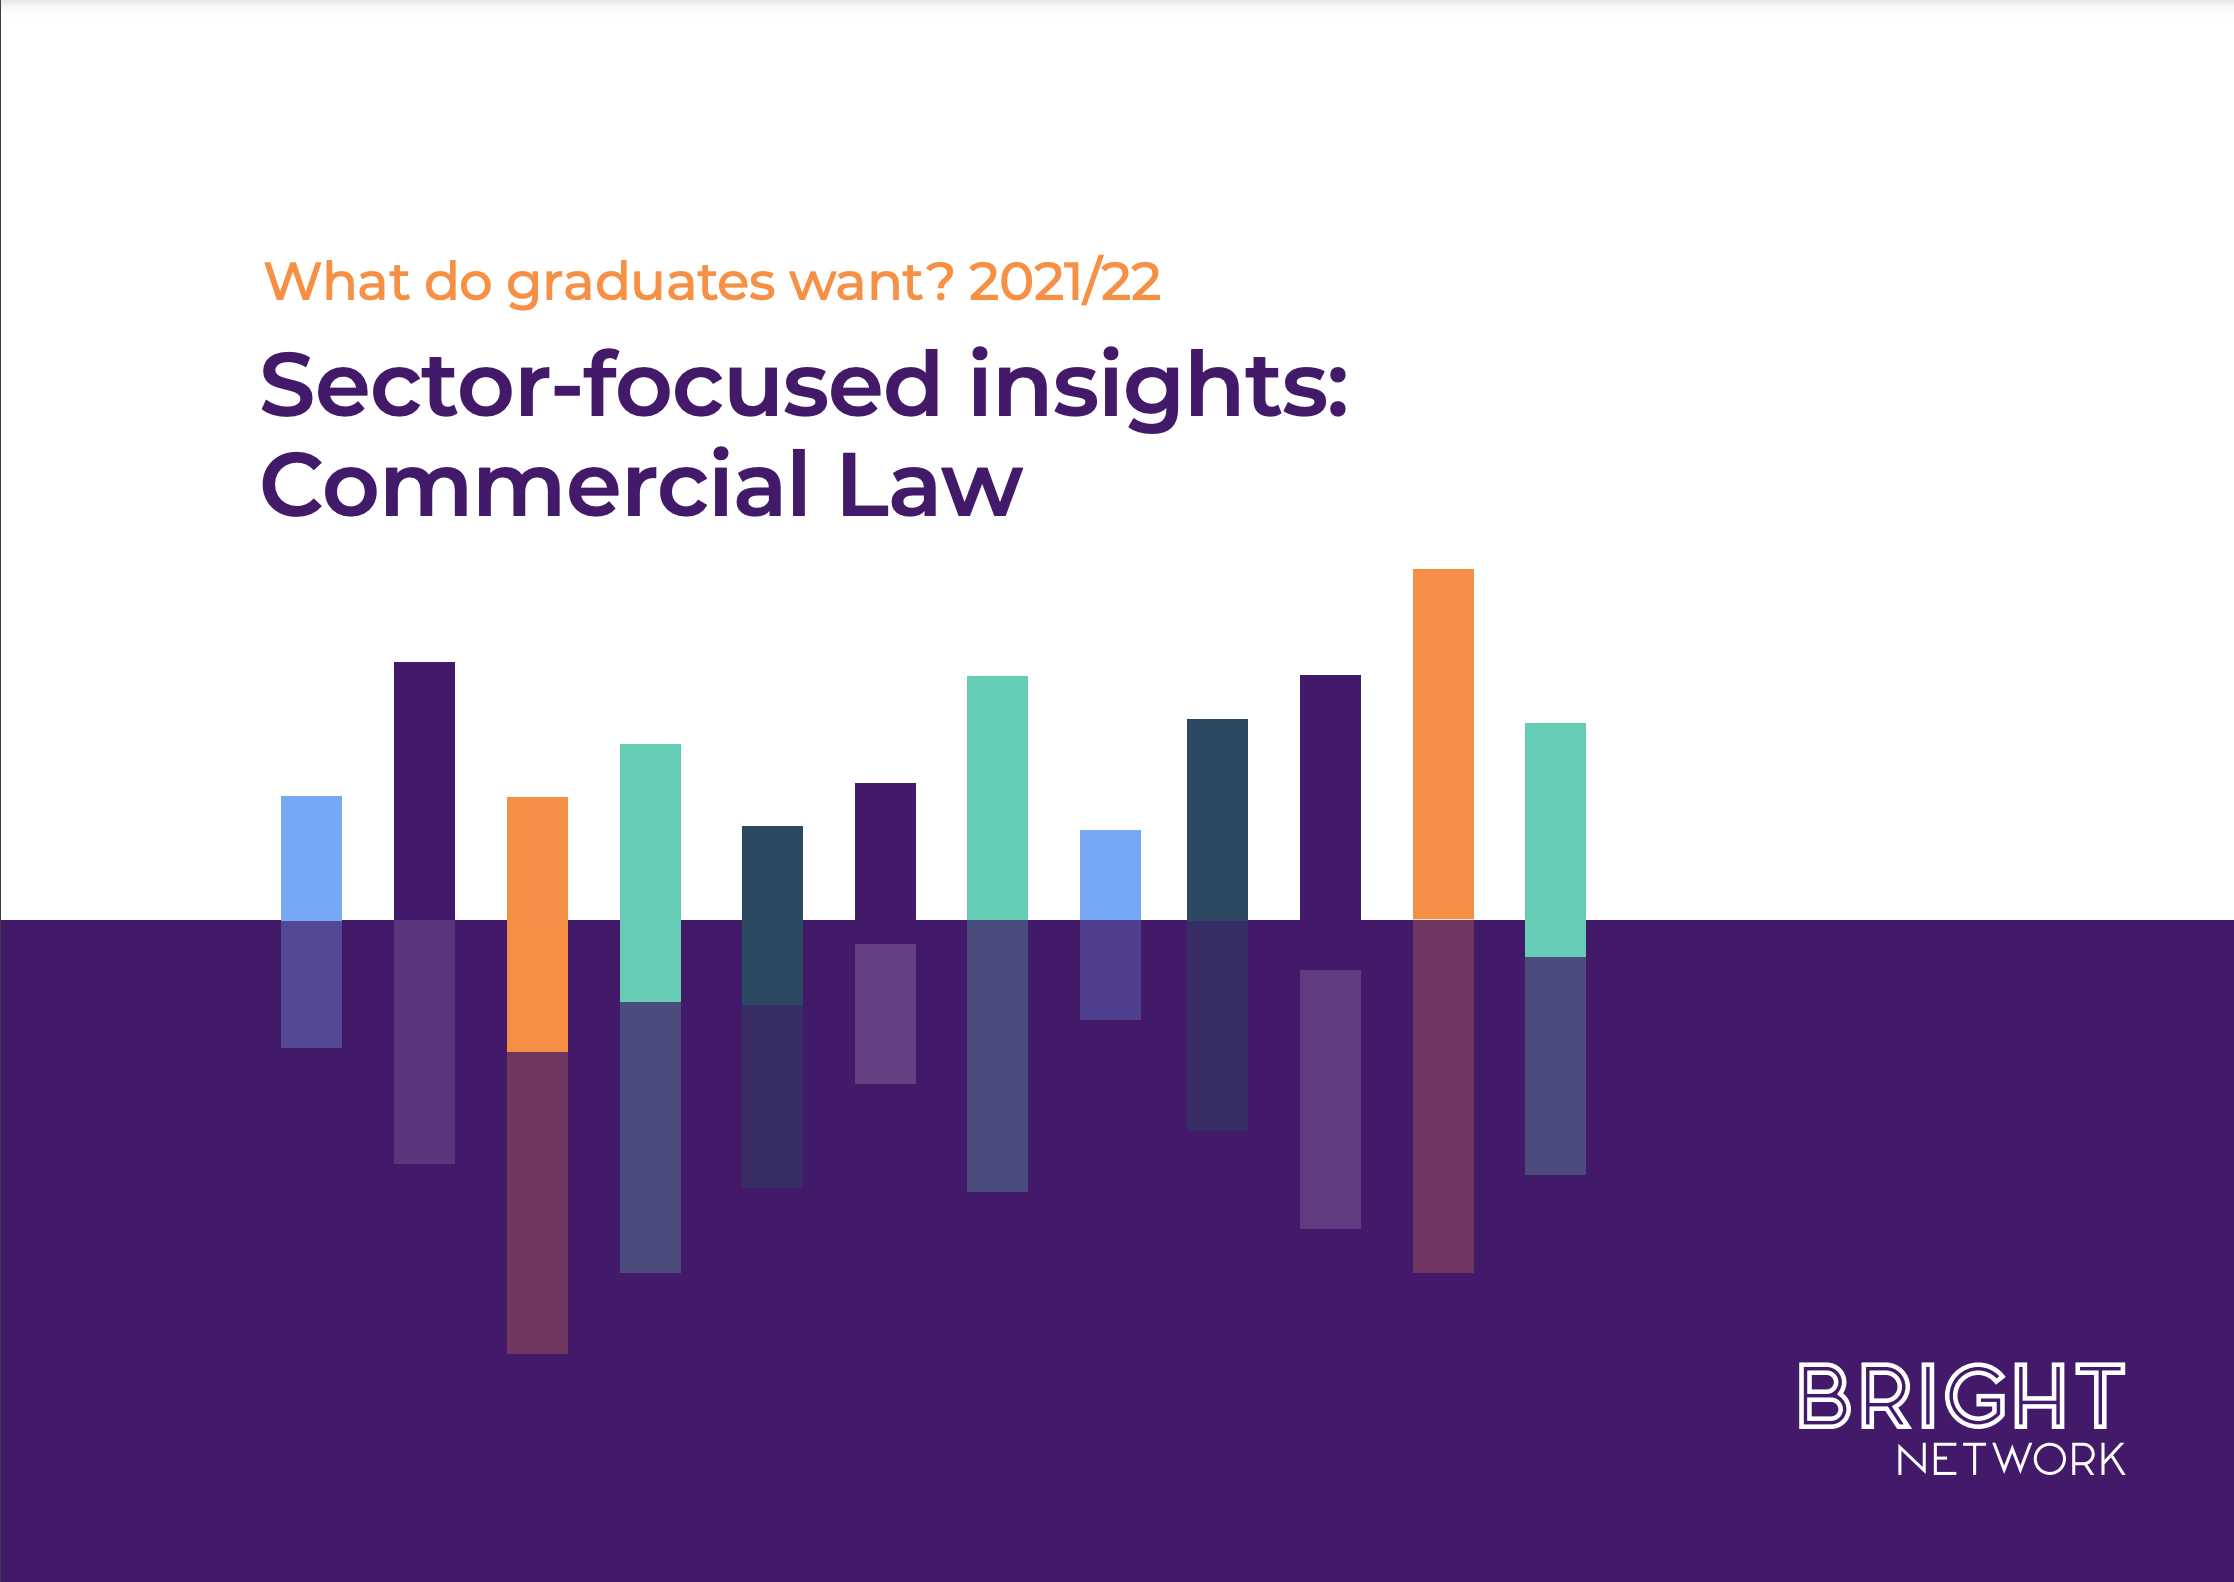 Sector-focused insights: Commercial Law